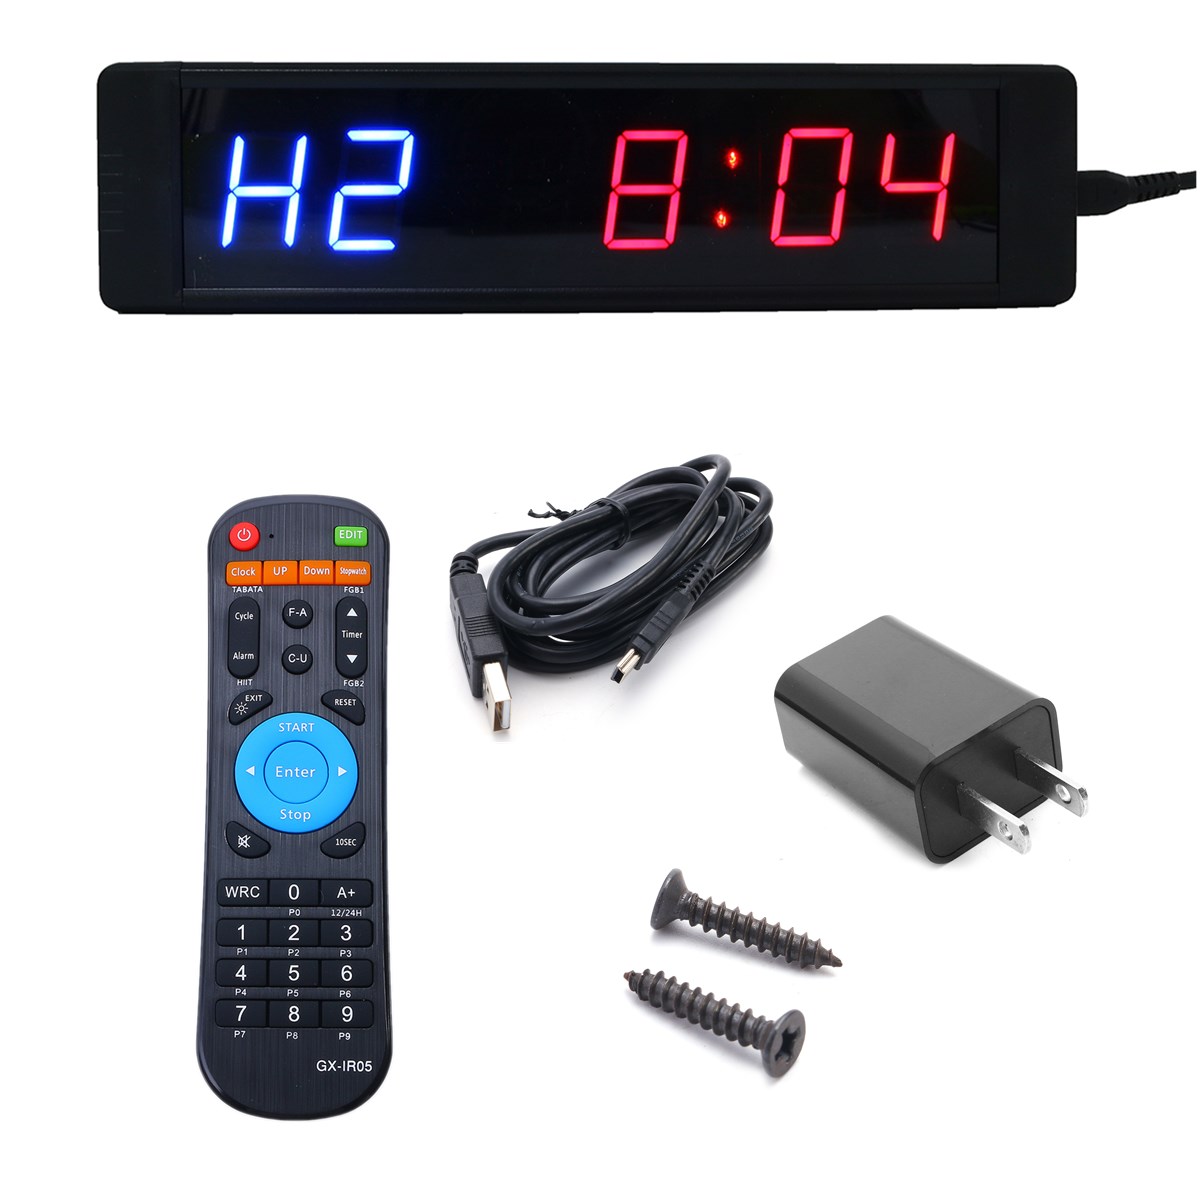 Programmable Crossfit Interval Timer Wall Clock w/Remote For Tabata Fitness